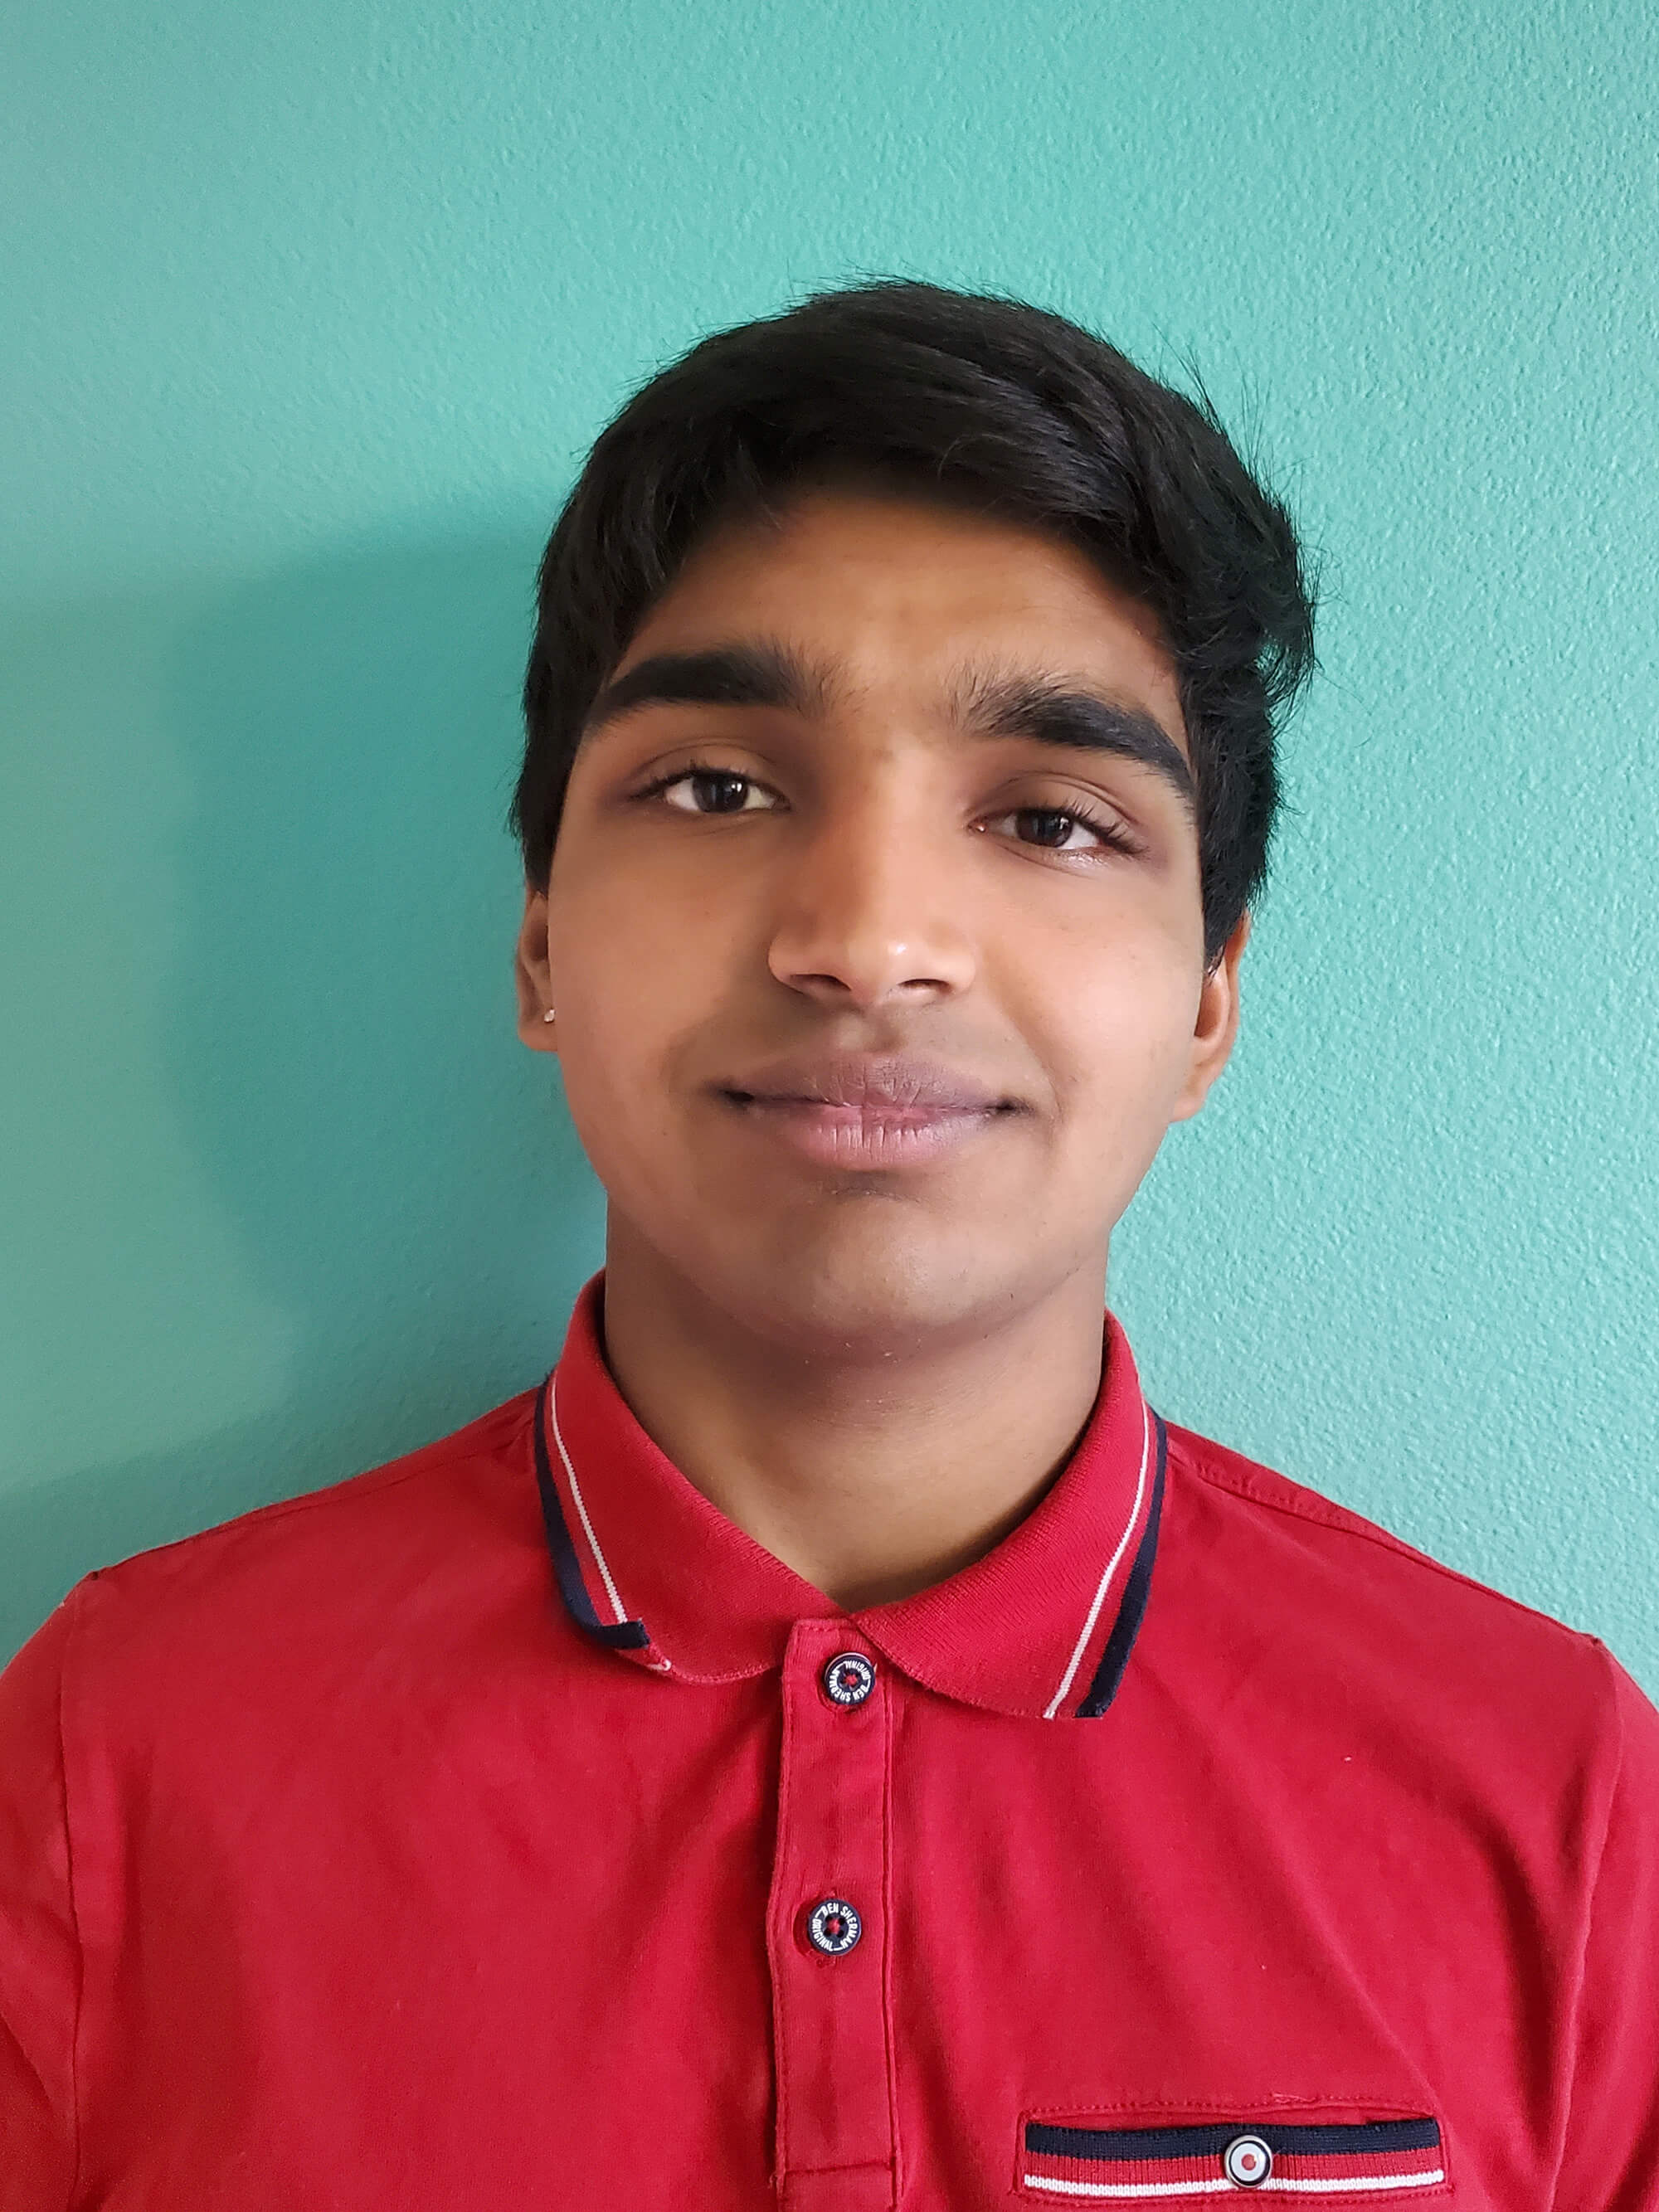 Headshot of UCSF ci2 intern wearing a red shirt against a blue/green background